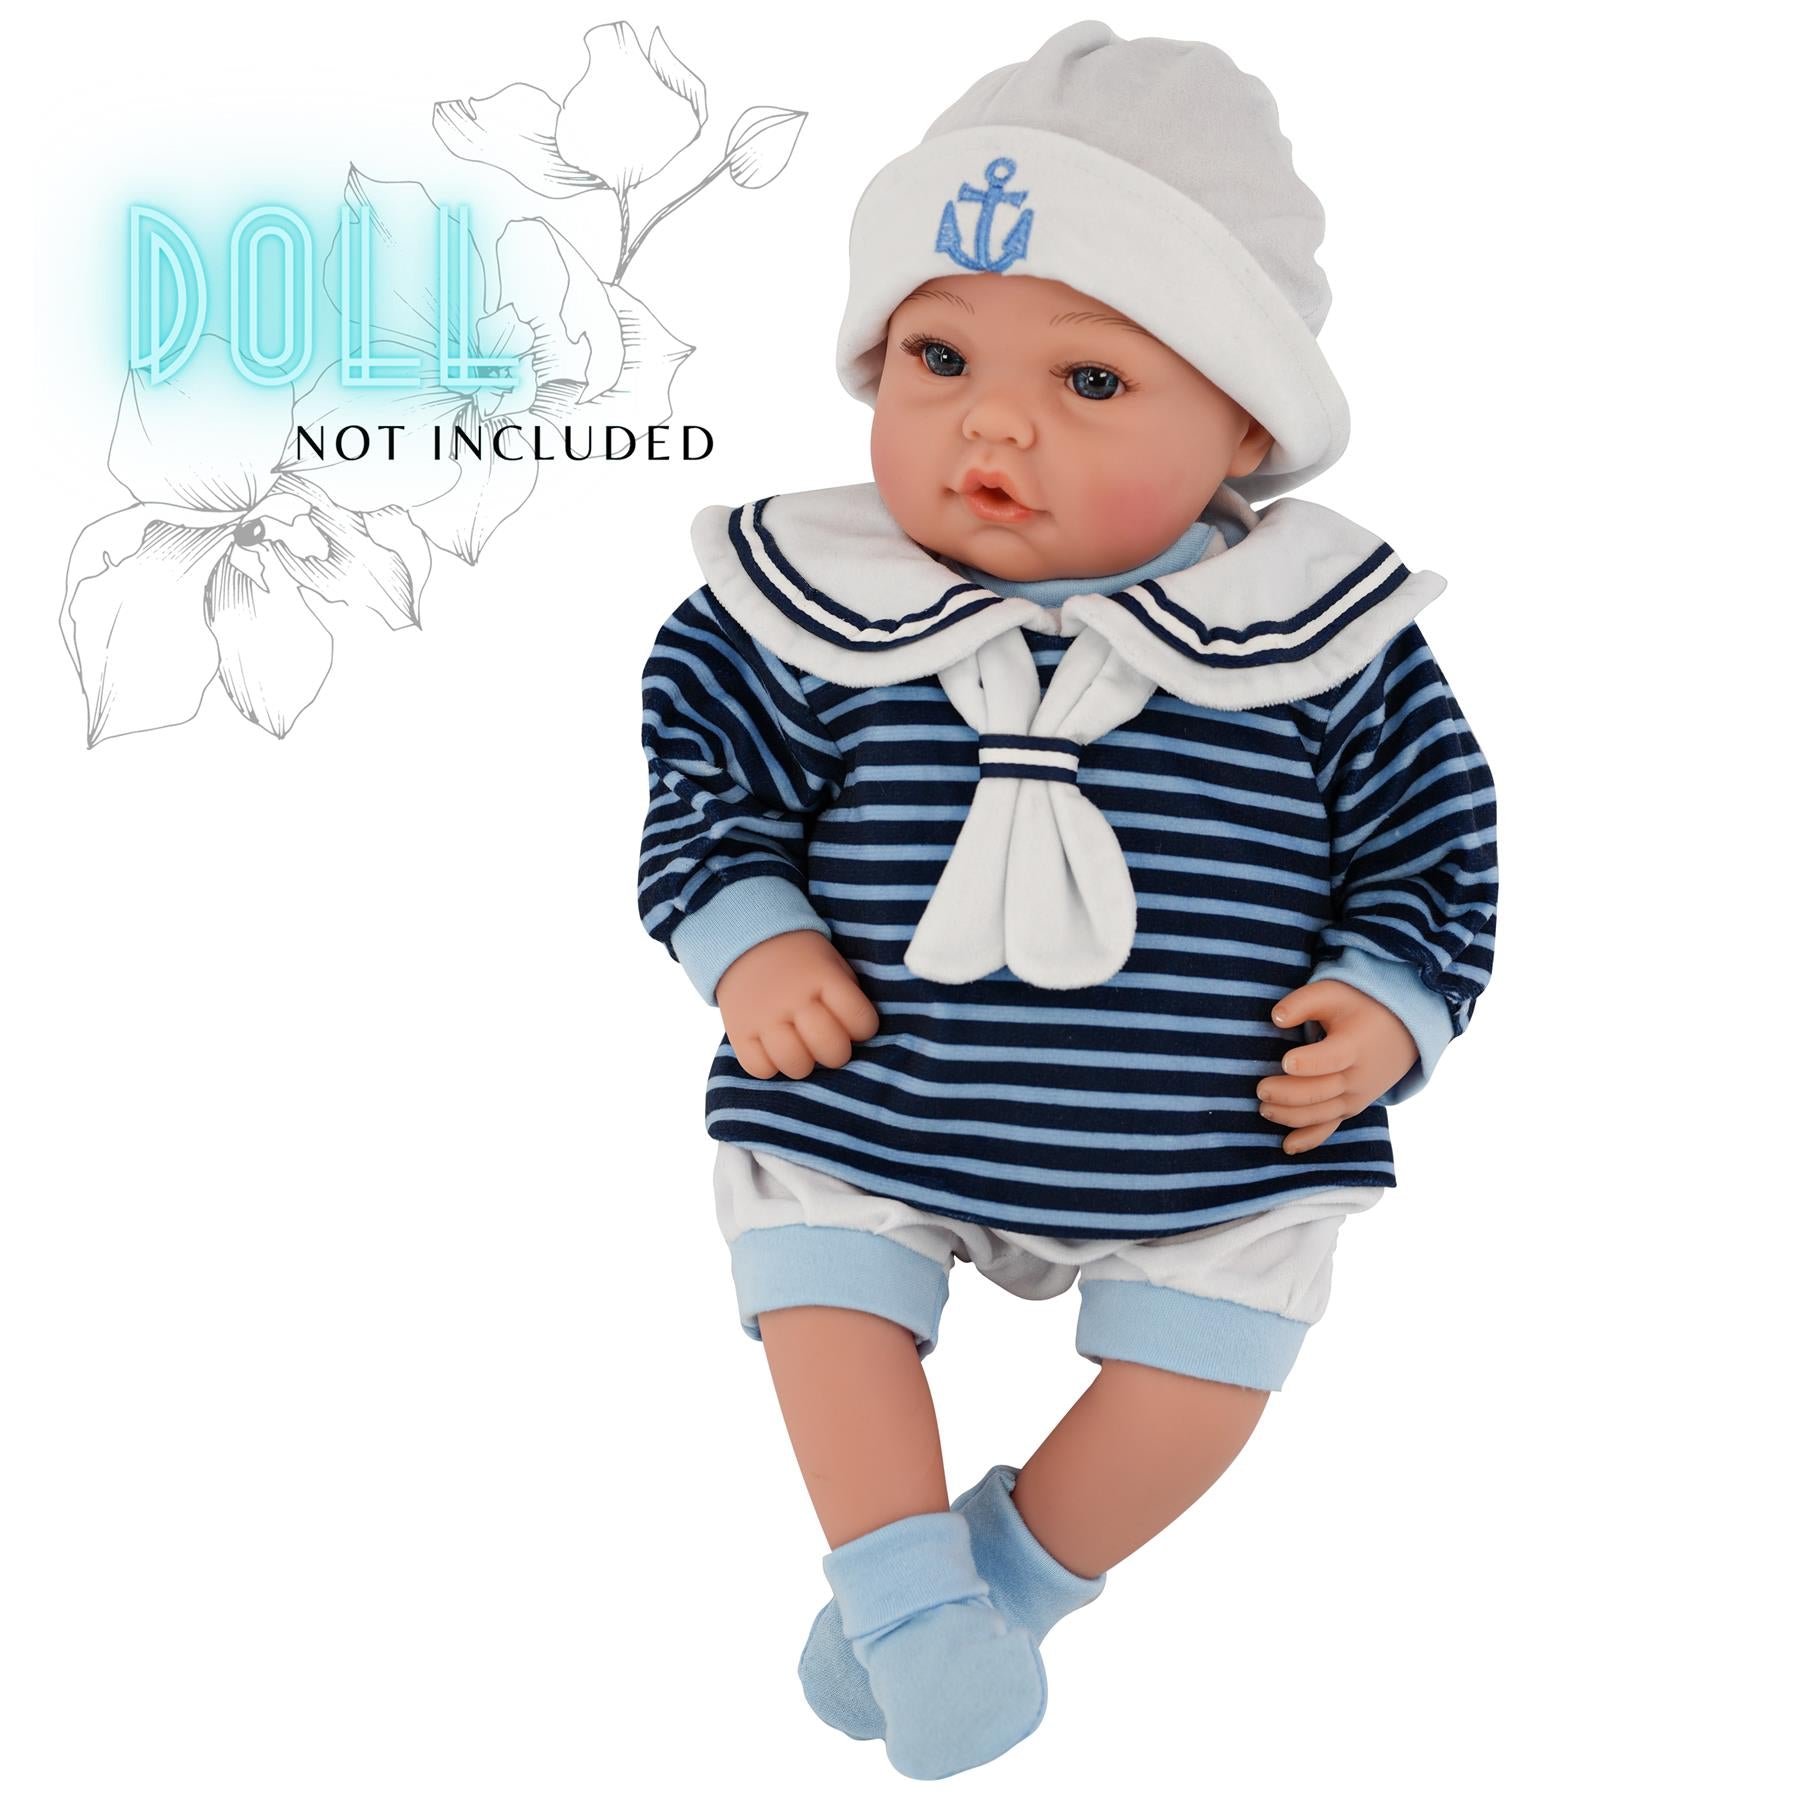 BiBi Outfits - Reborn Doll Clothes (Sailor) (50 cm / 20") by BiBi Doll - The Magic Toy Shop